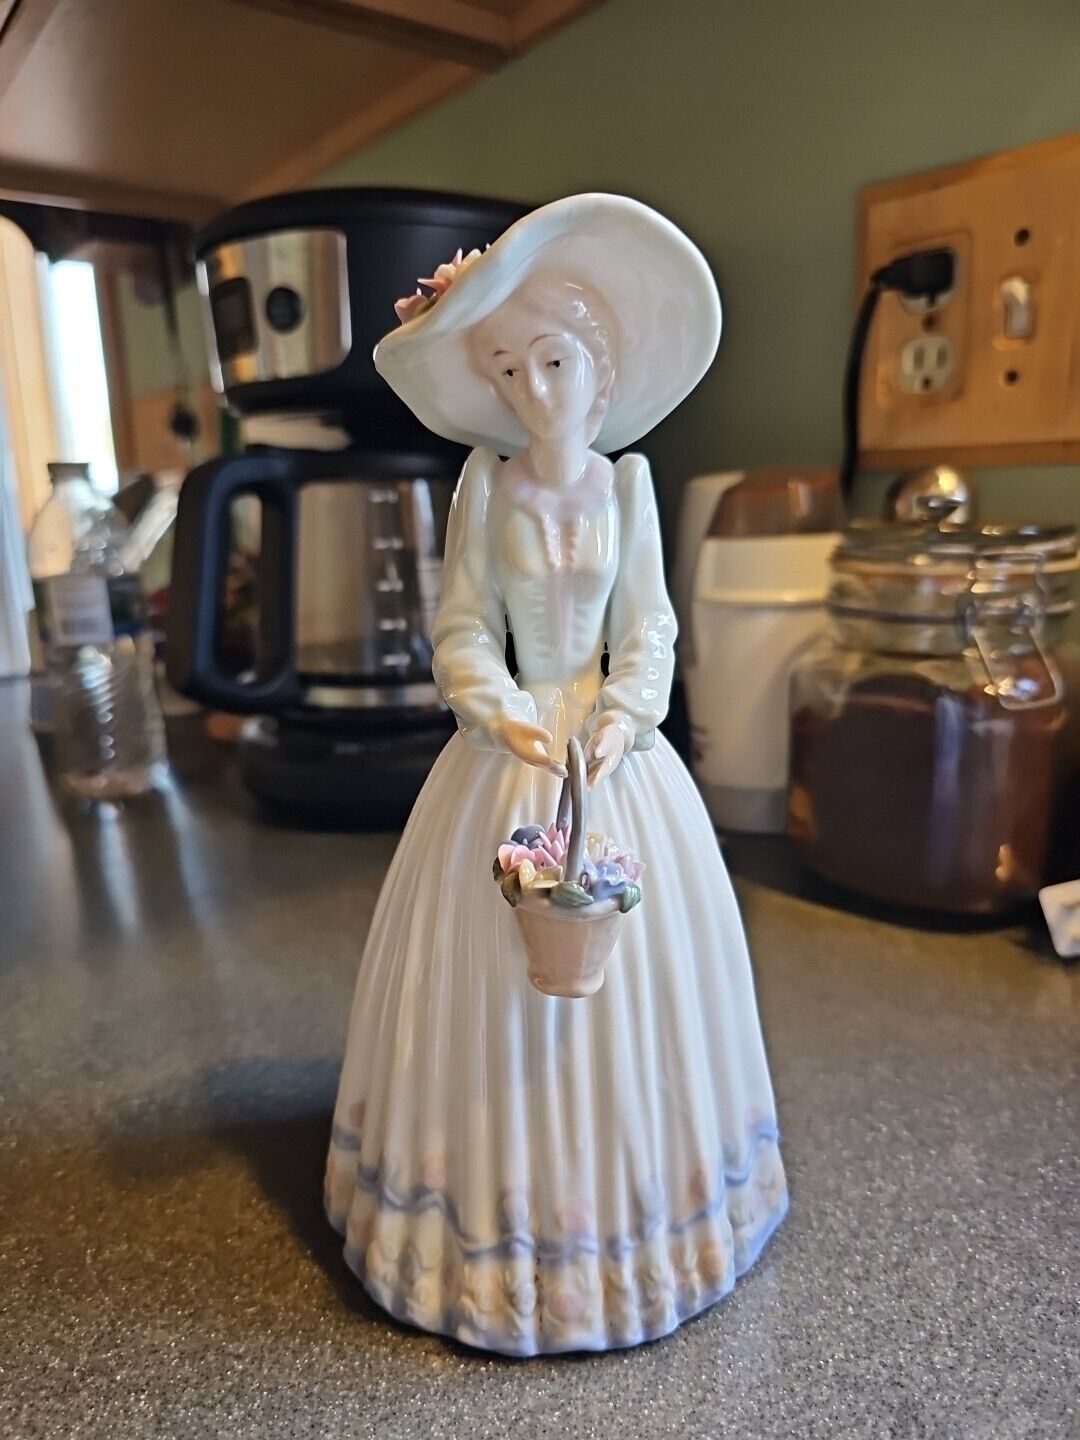 Porcelin Woman Figurine With Basket Of Flowers